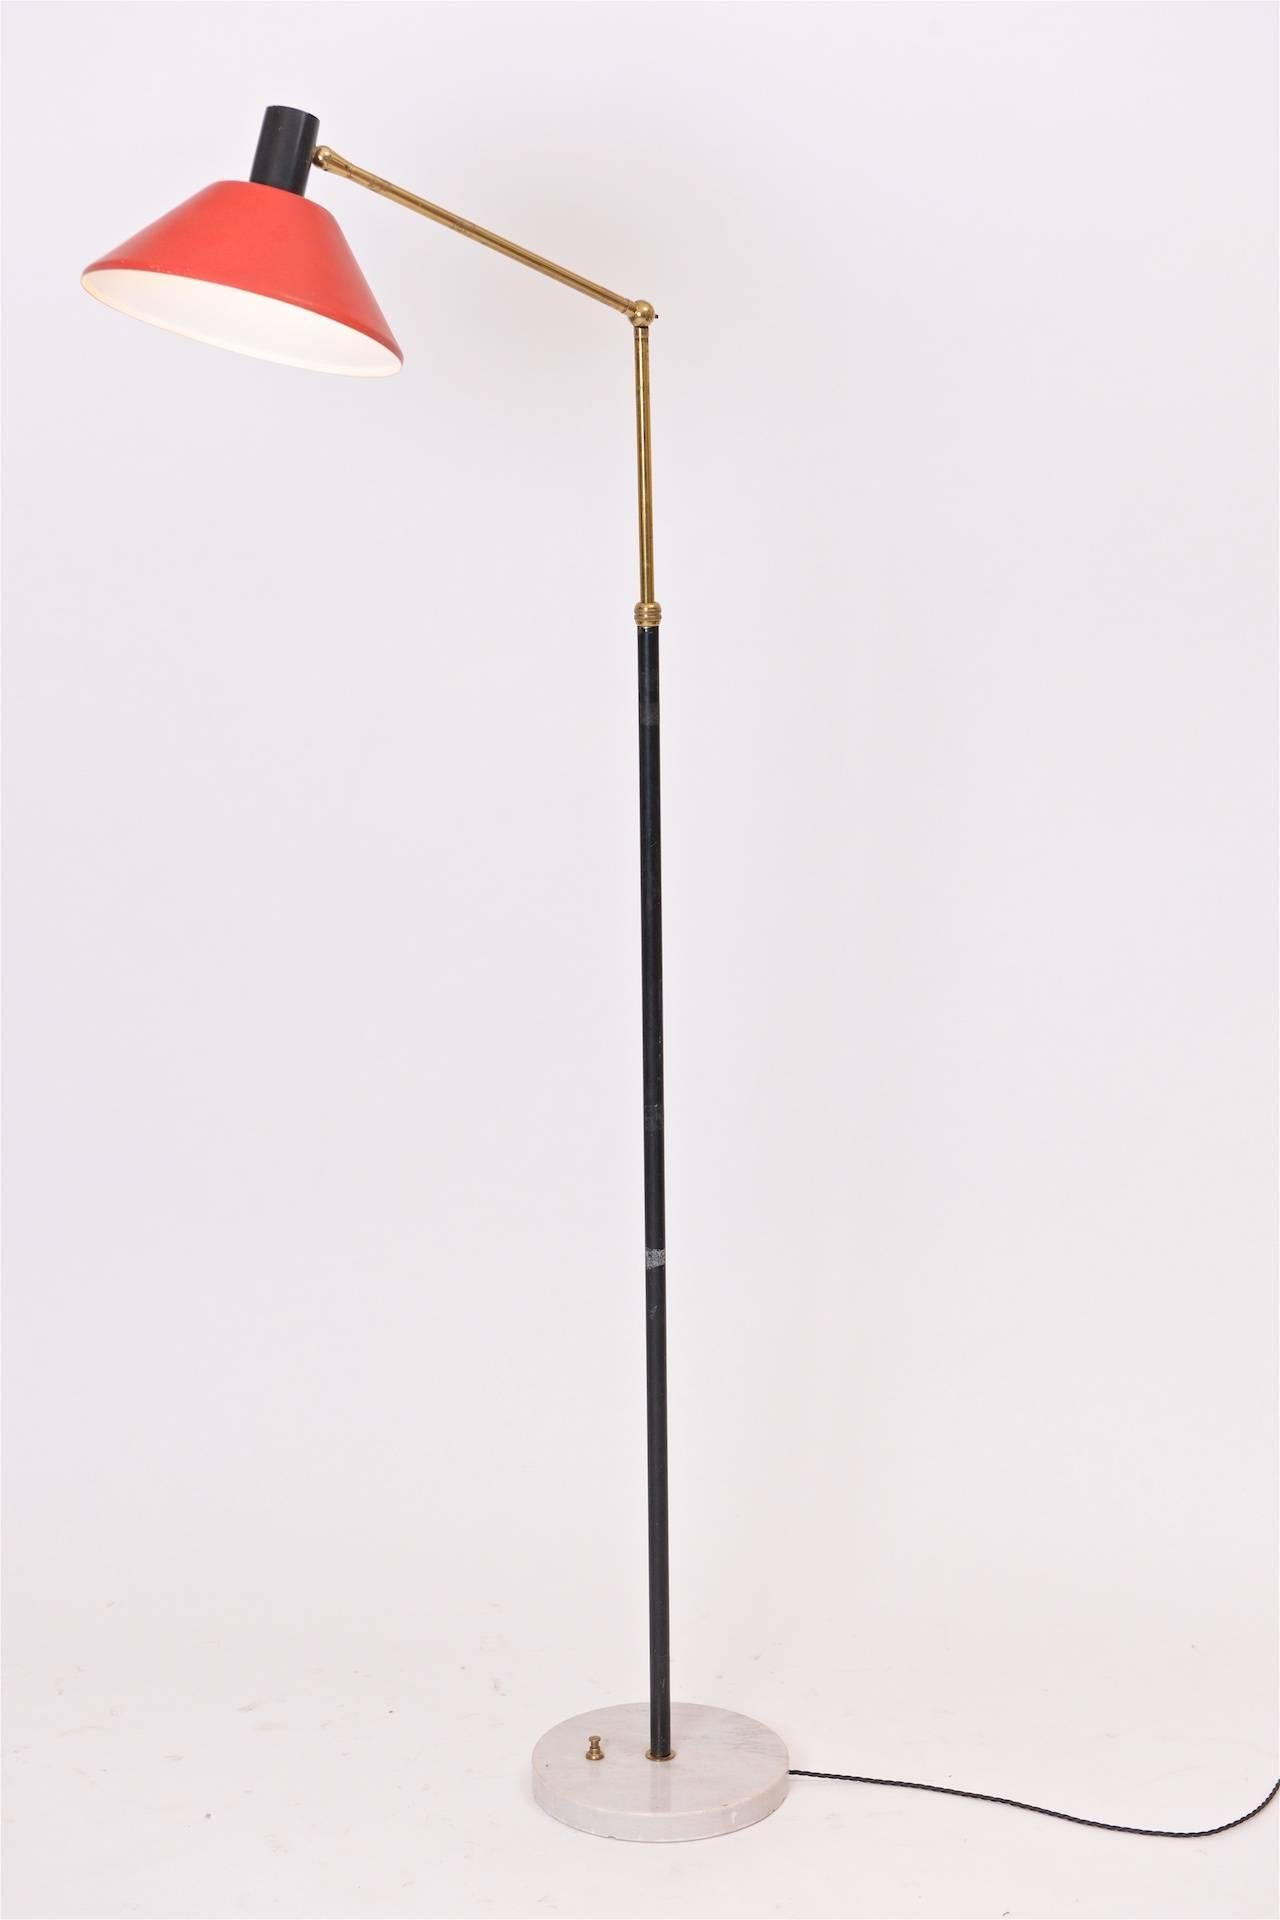 Stilux floor lamp with original red lacquer shade, brass and marble base, circa 1950

Re wired and PAT tested

Dimensions:
Fully extended 185cm lowest 142cm x shade 27.5cm (diameter) x marble base 25cm diameter.